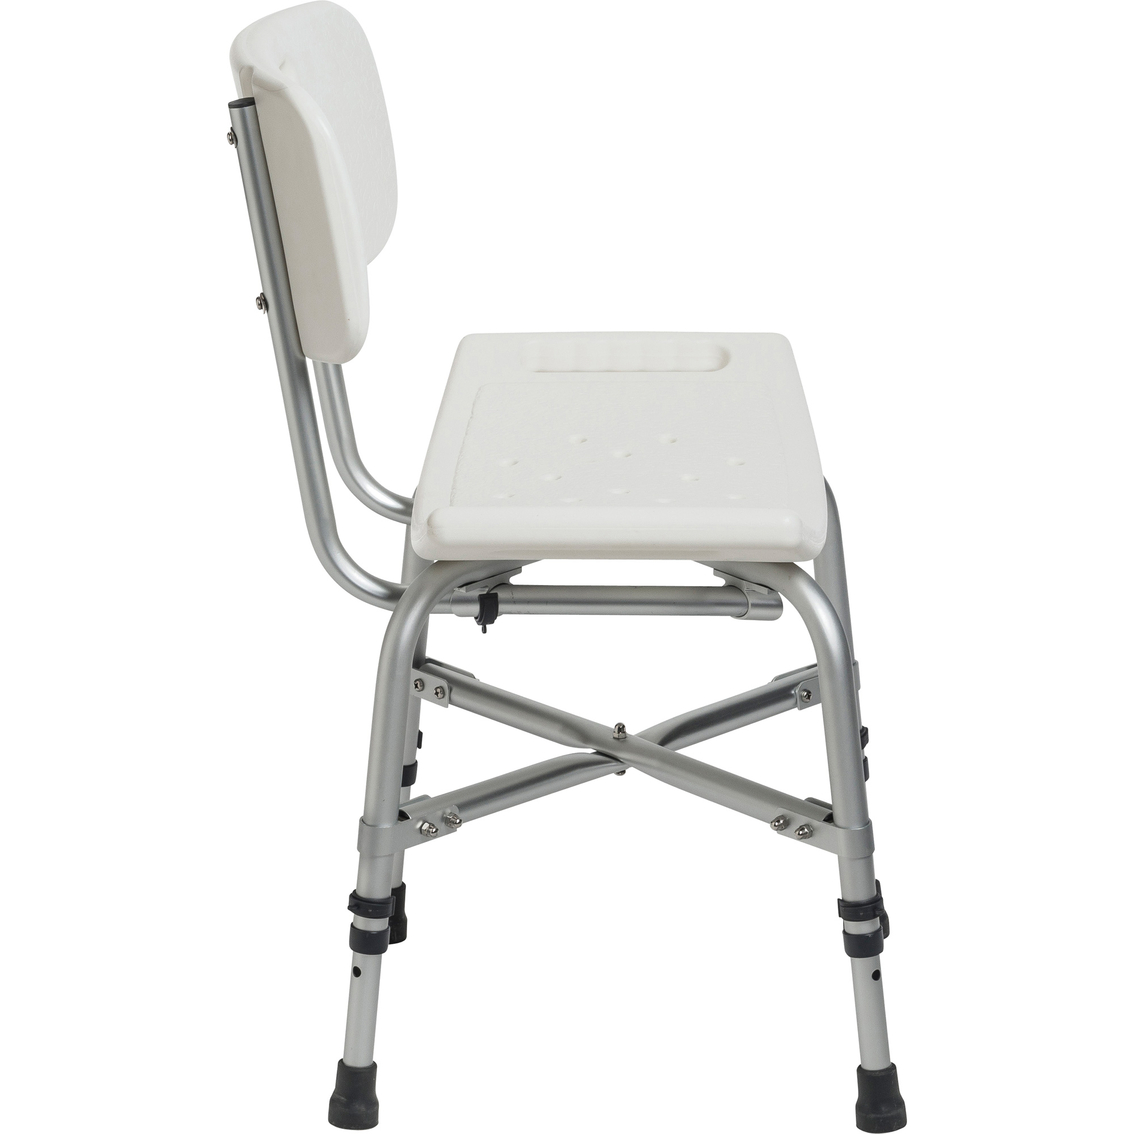 Drive Medical Bariatric Heavy Duty Bath Bench with Backrest - Image 4 of 4